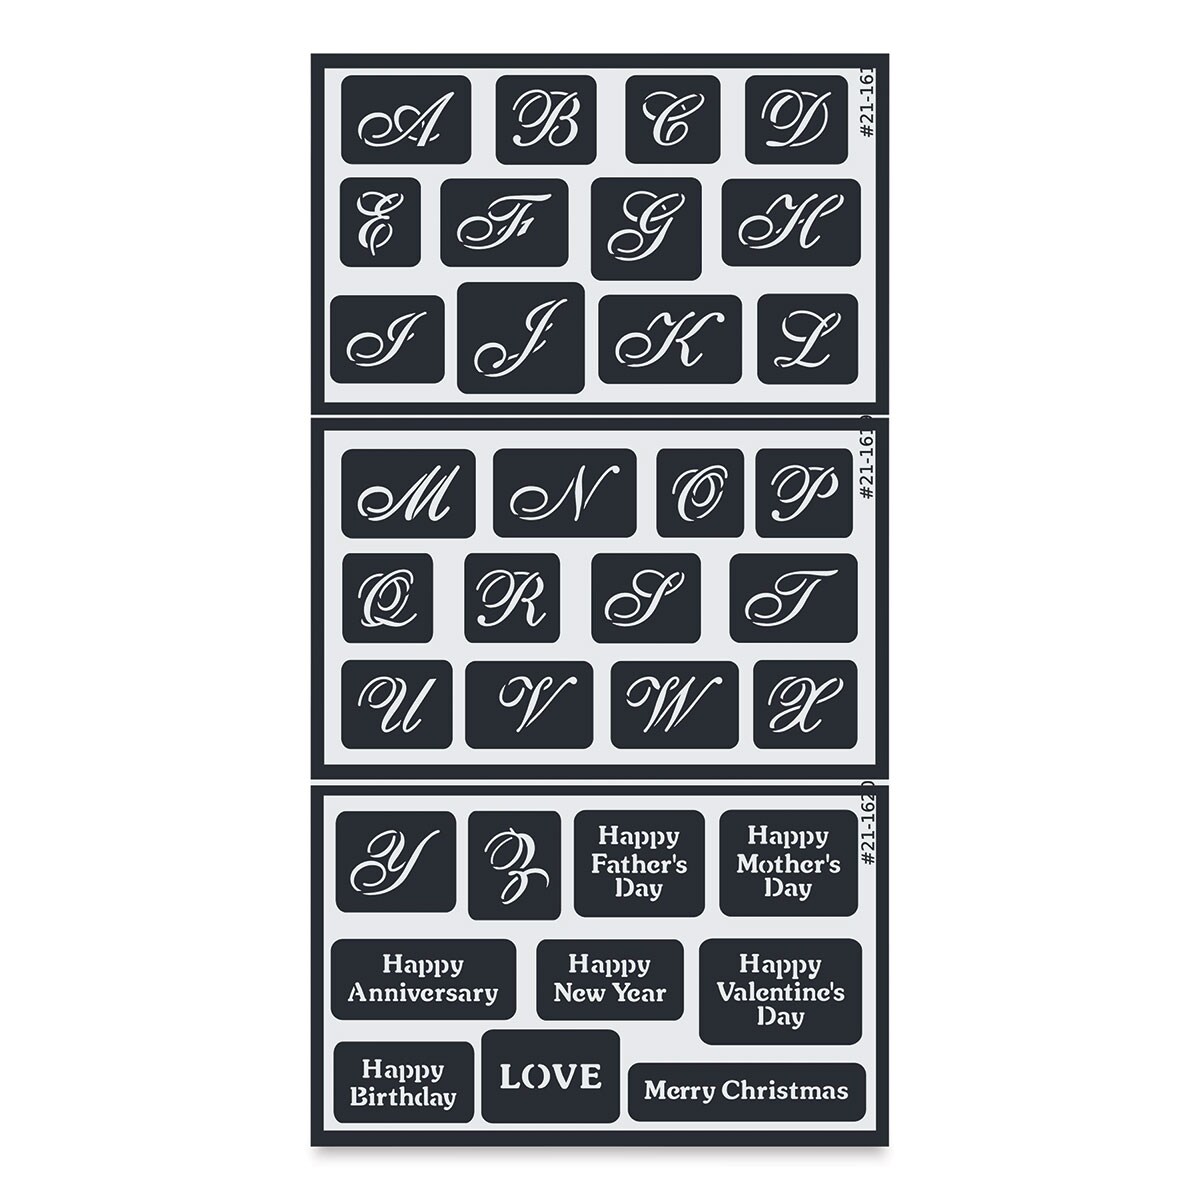 2 Armour Etch Over N Over Glass Etching Wedding Stencils Reusable Template  - Etching Stencil Wedding Theme - Glass Etching Stencils Wedding, Floral